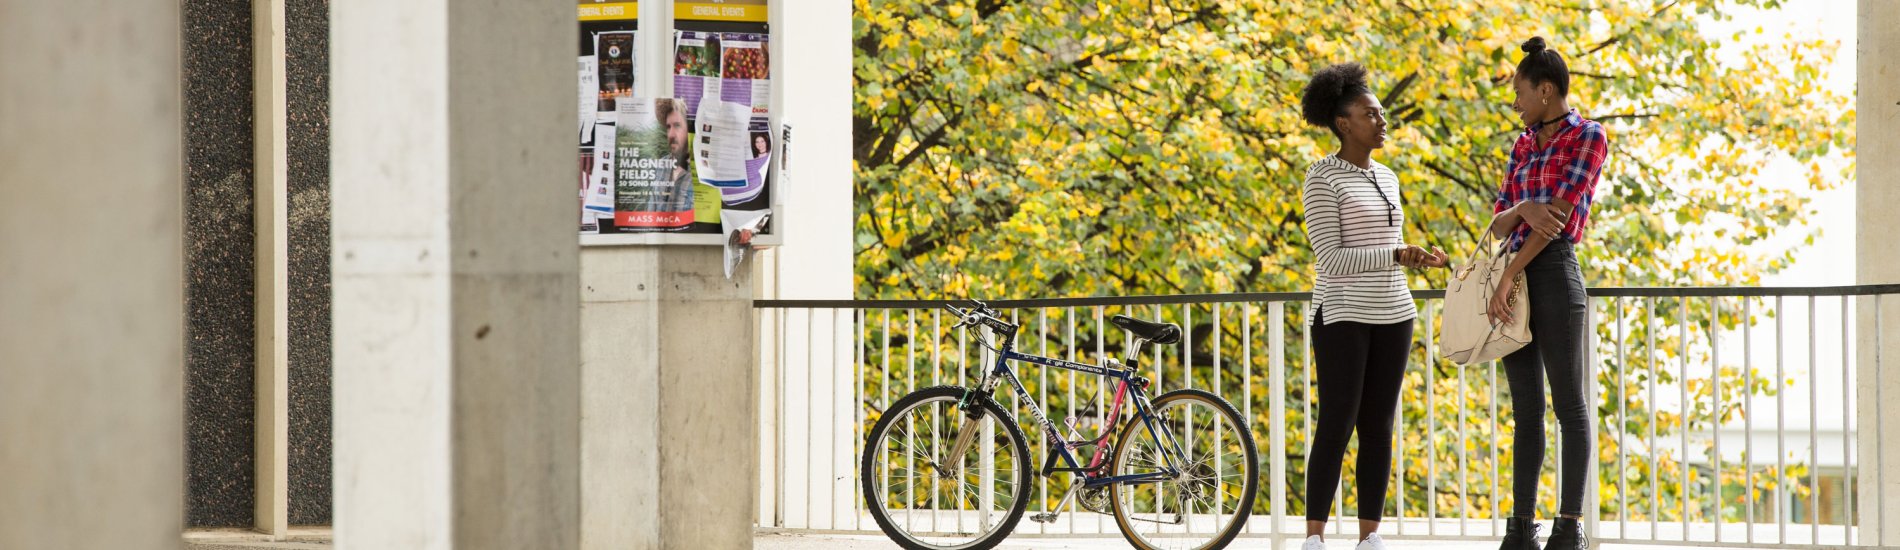 Two students stand outside a residential quad talking and smiling on a spring day. There is a bicycle and a bulletin board in the background.